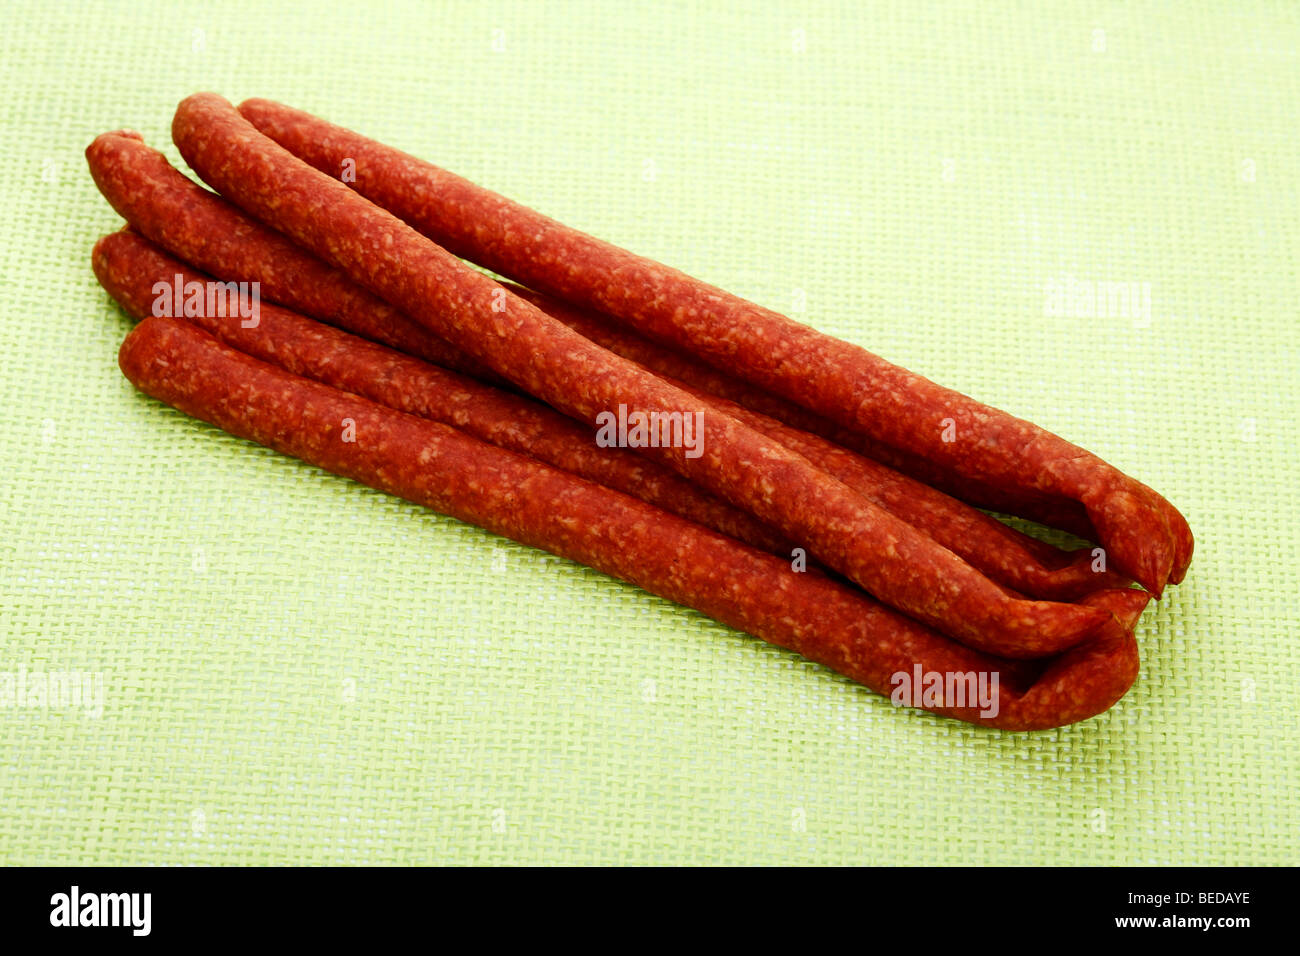 Mettwurst sausages Stock Photo